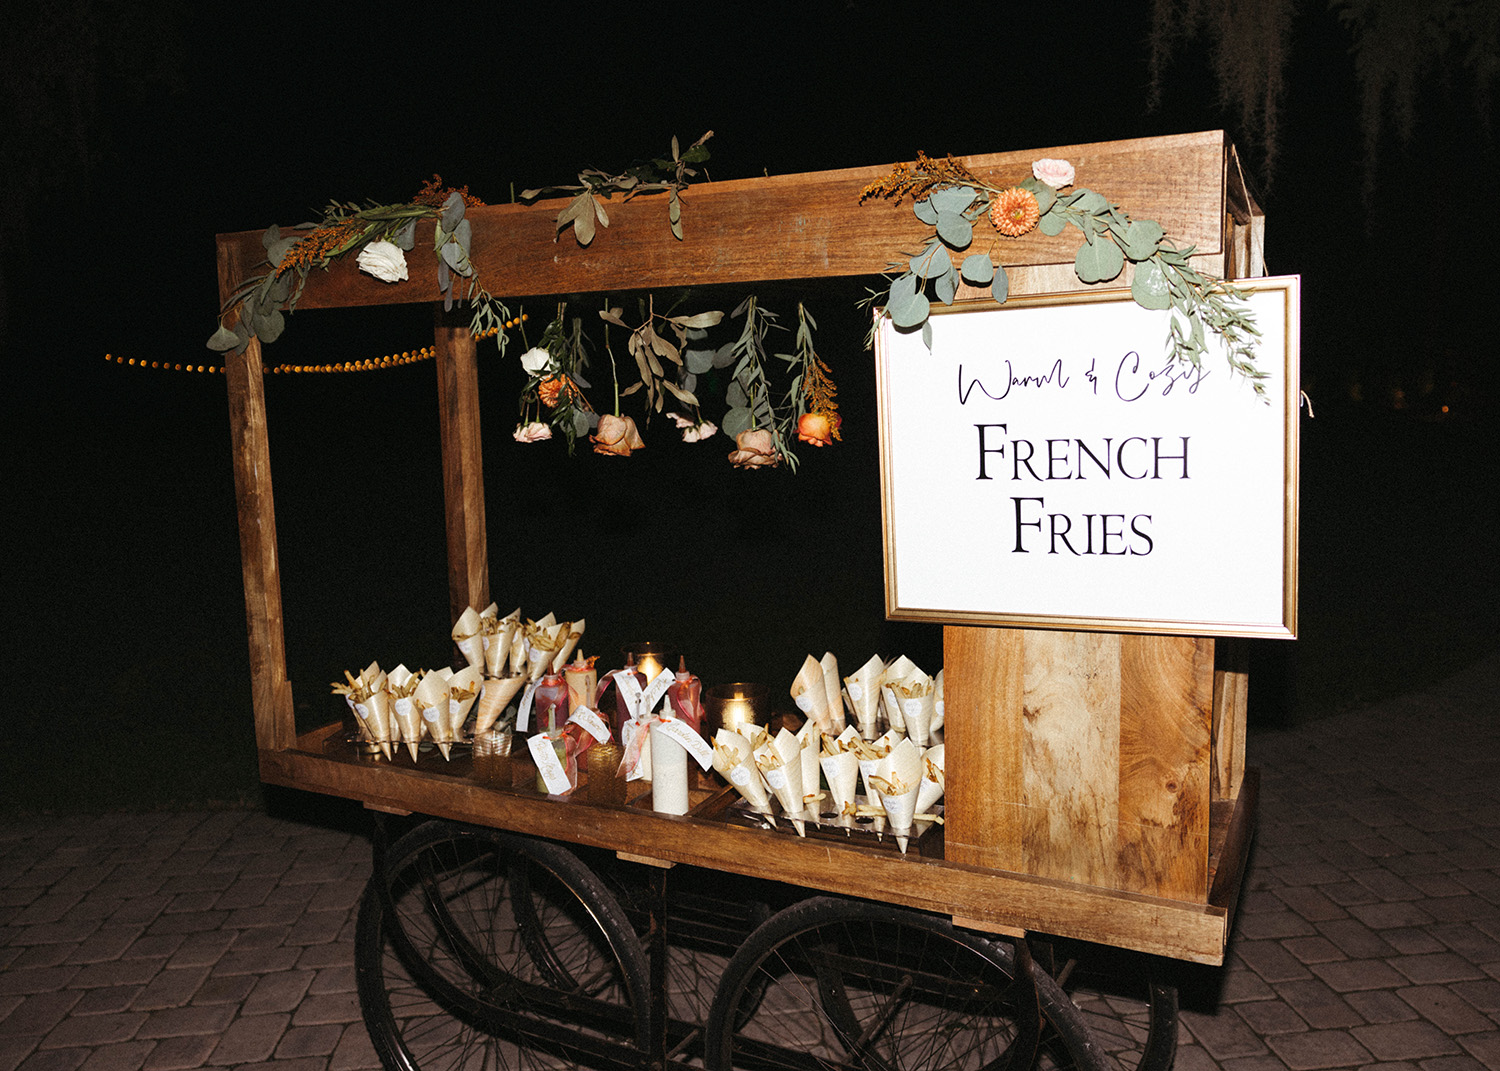 Well decorated french fry booth.